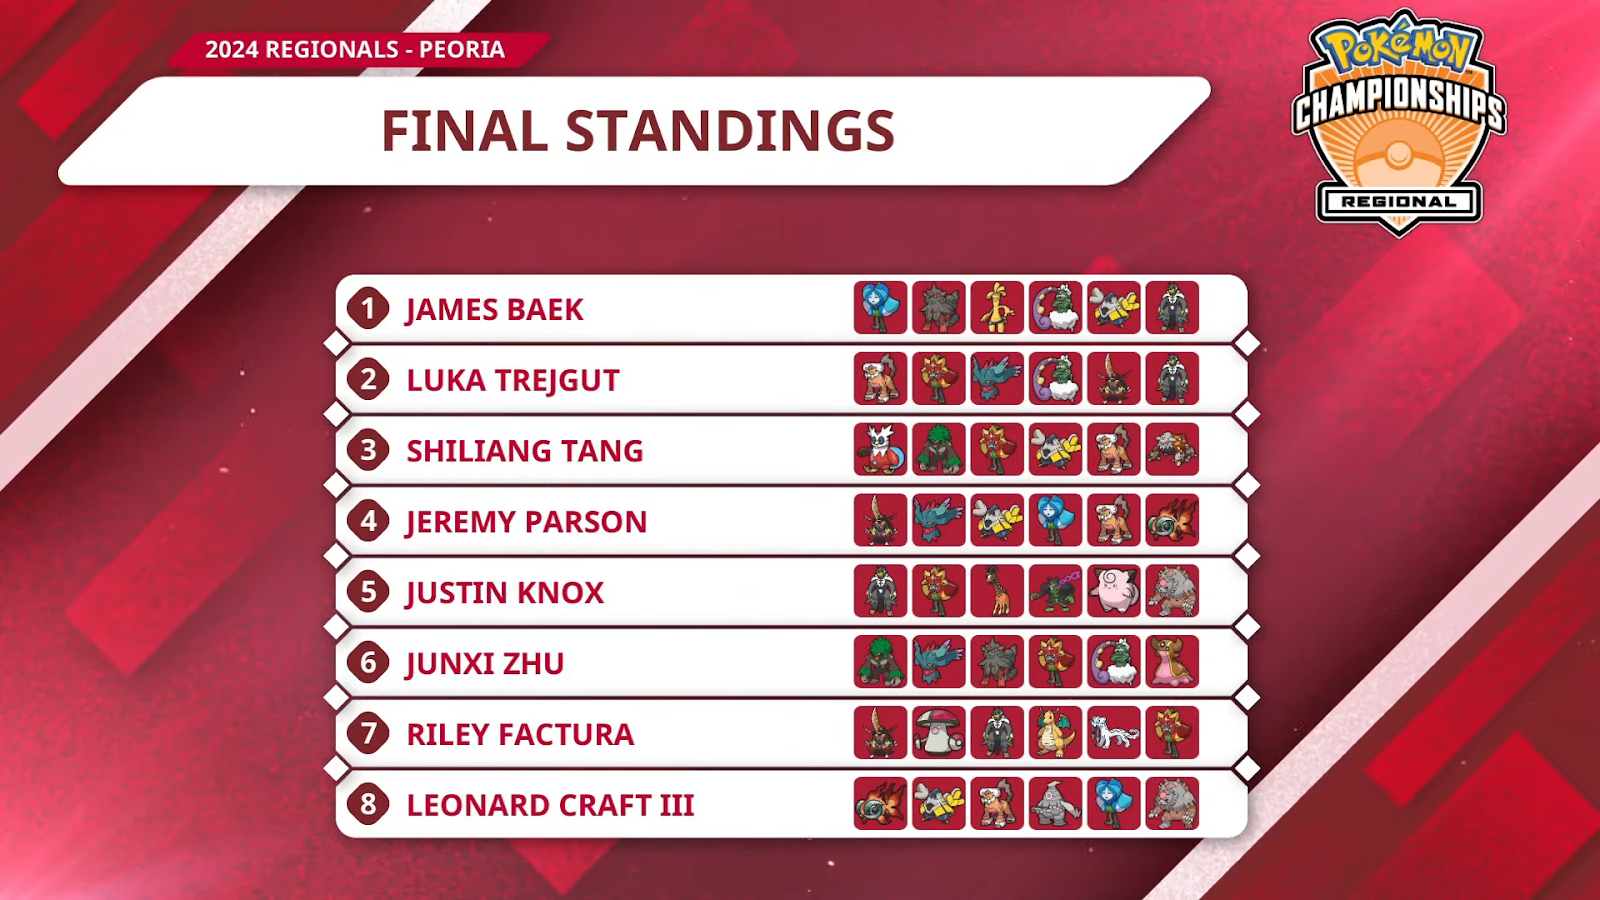 The final standings at the Pokémon Scarlet and Violet Peoria Regionals with James Baek as the champion.